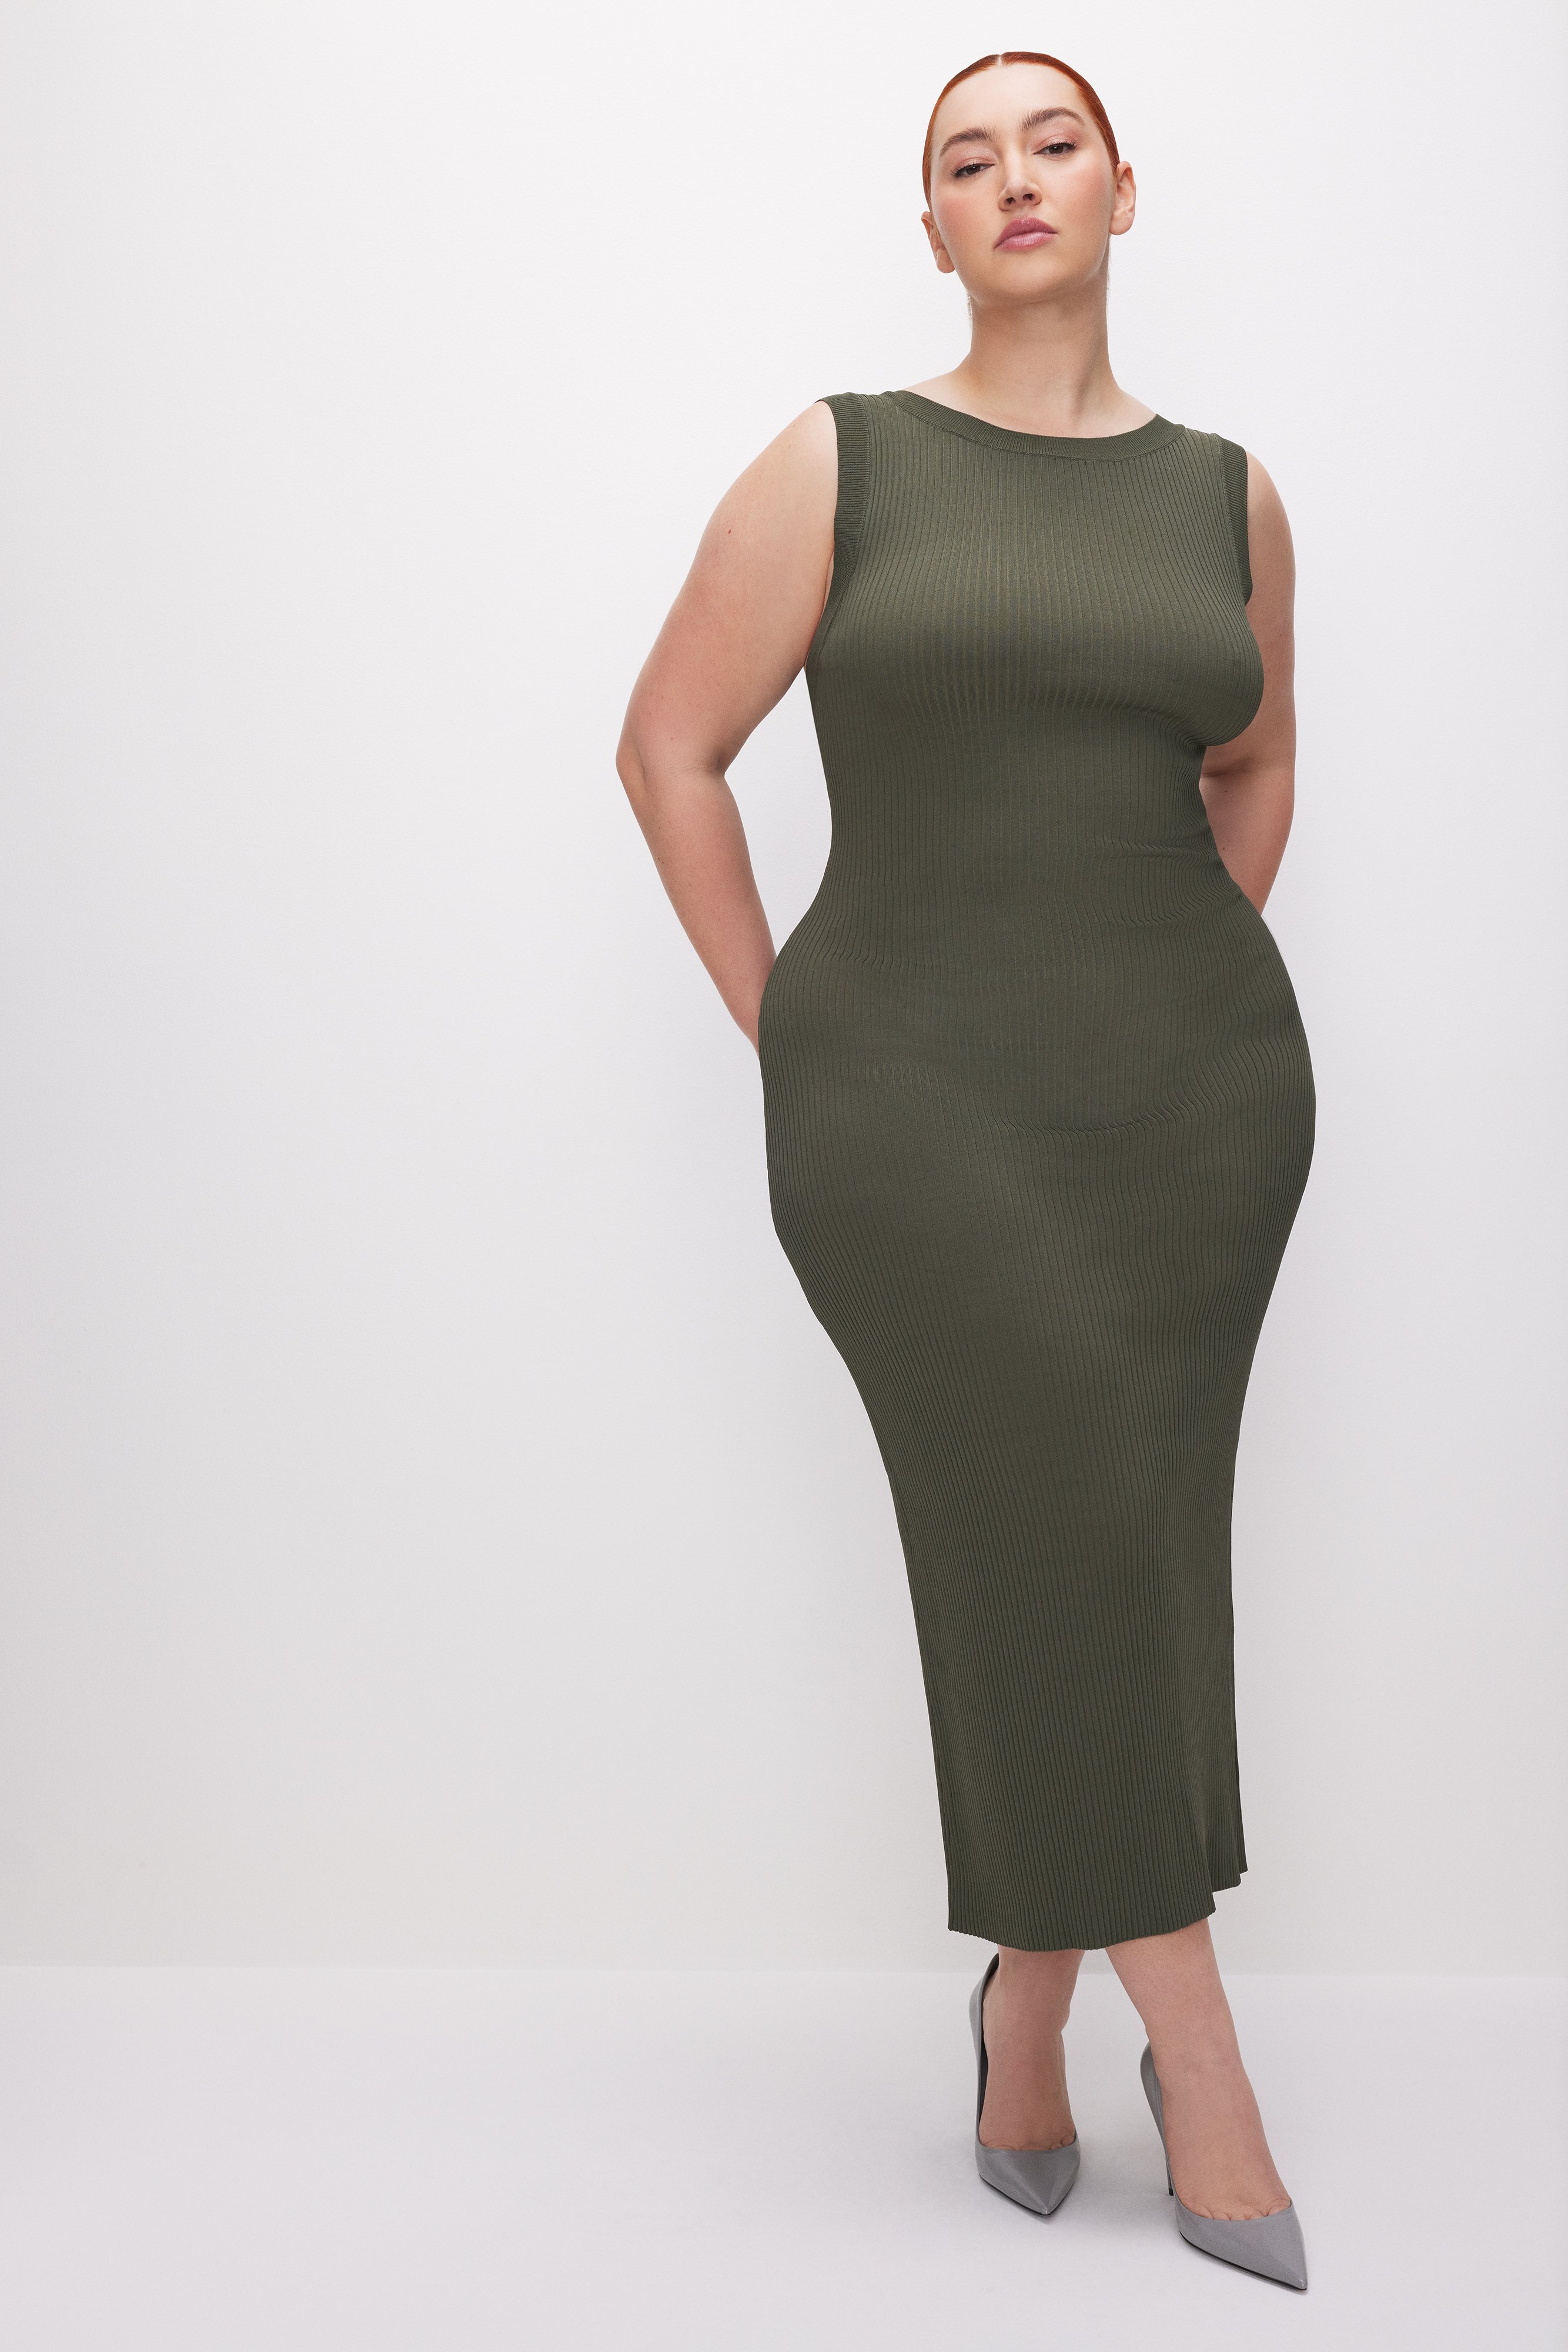 Styled with STRETCH RIB SCOOP BACK MIDI DRESS | FATIGUE001